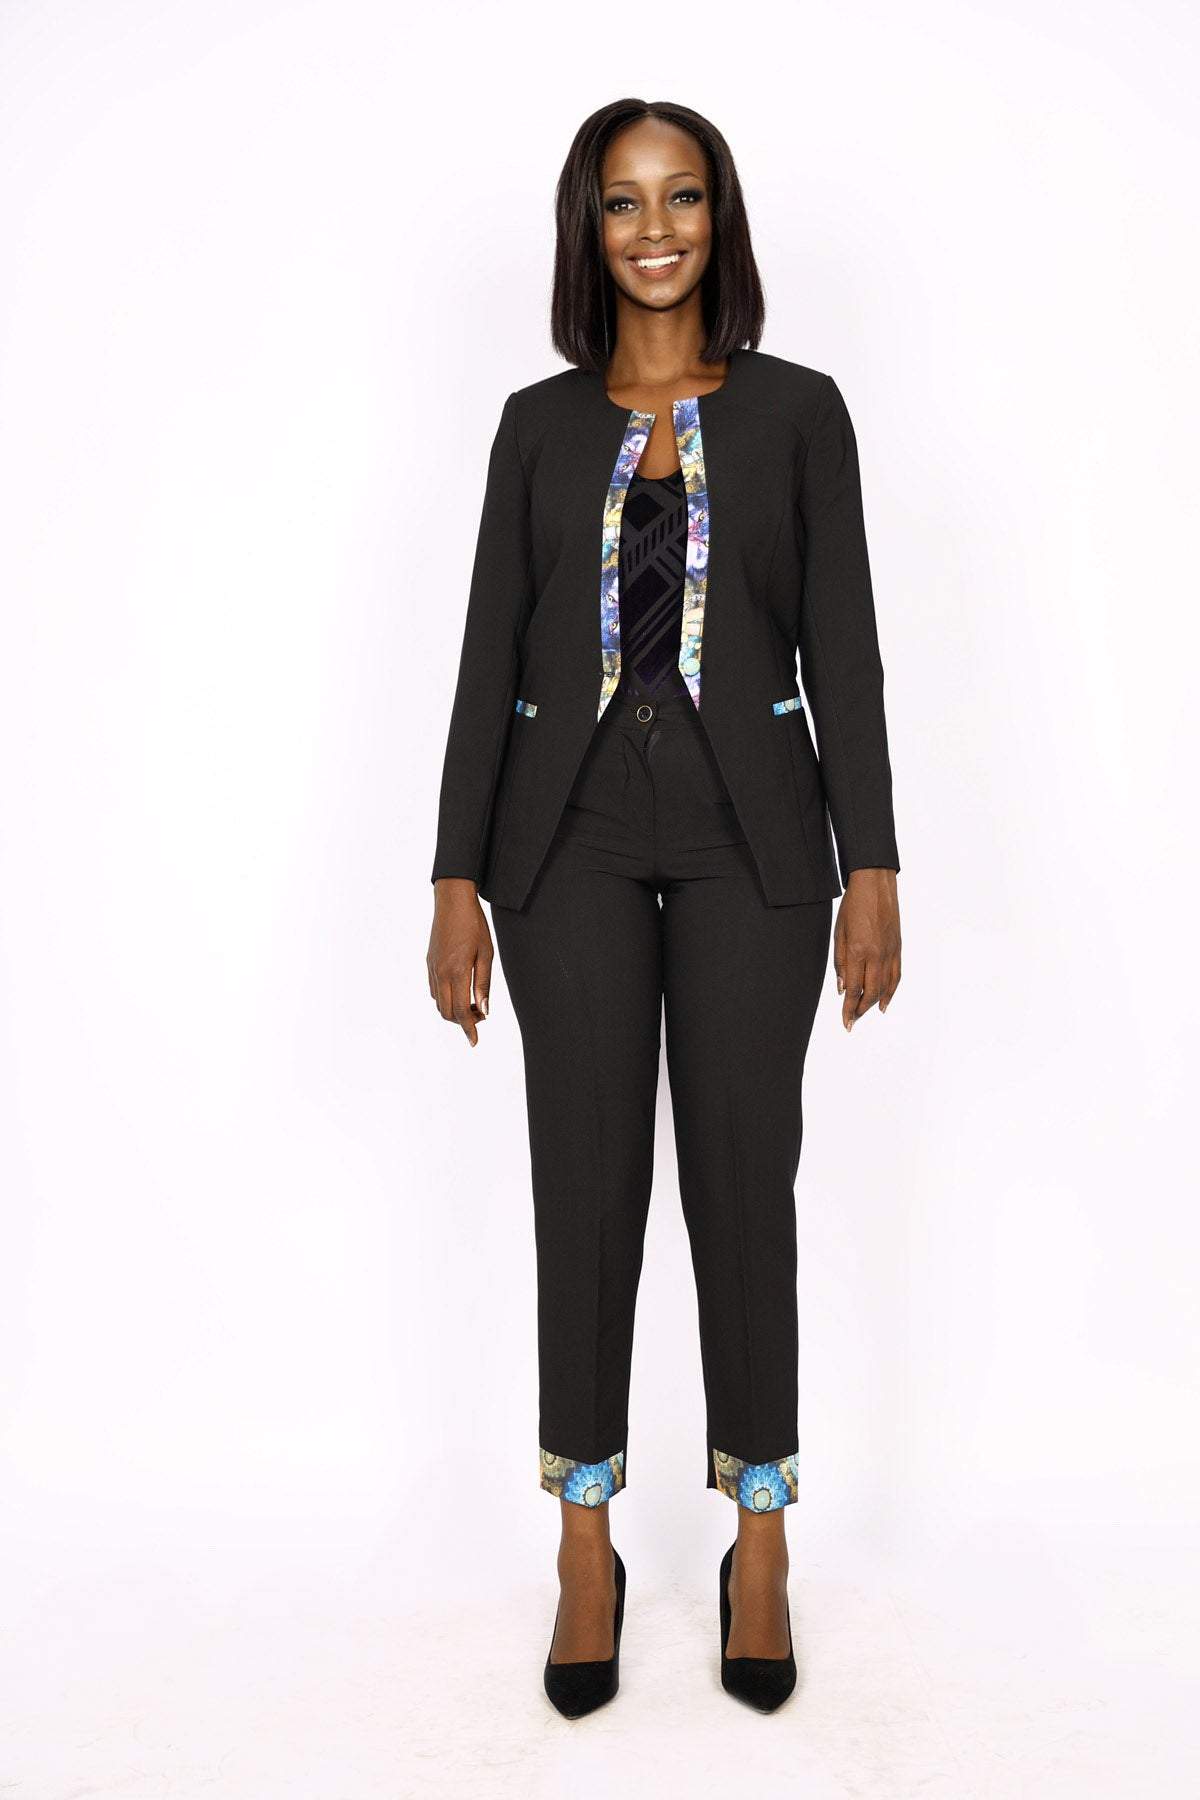 African Office Wear Classic Suit Black-danddclothing-AFRICAN WEAR FOR WOMEN,Black,Ladies Suits